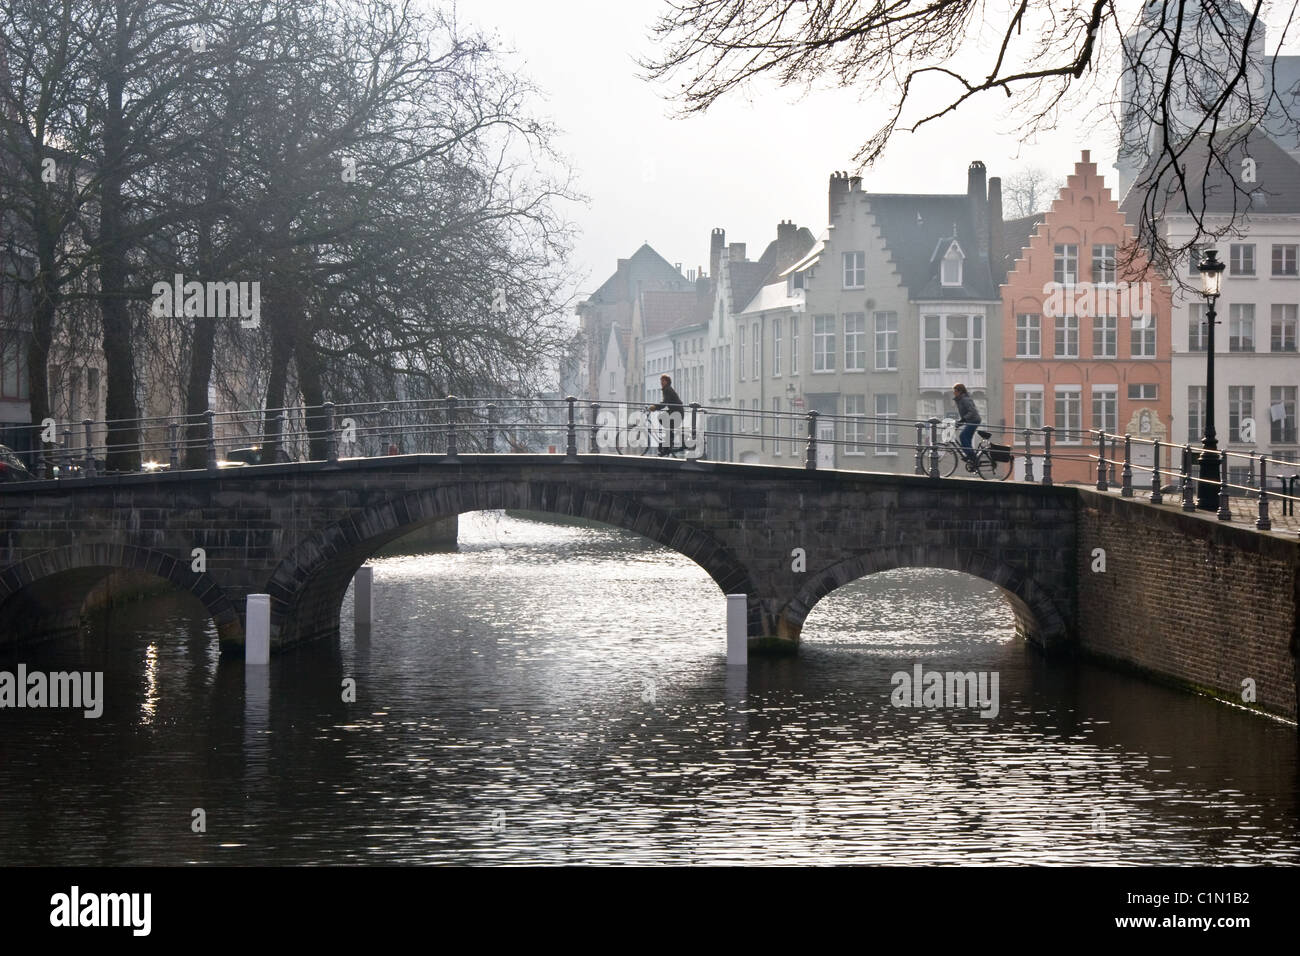 Cyclists on bridge over canal, misty winter morning, Bruges, Belgium Stock Photo